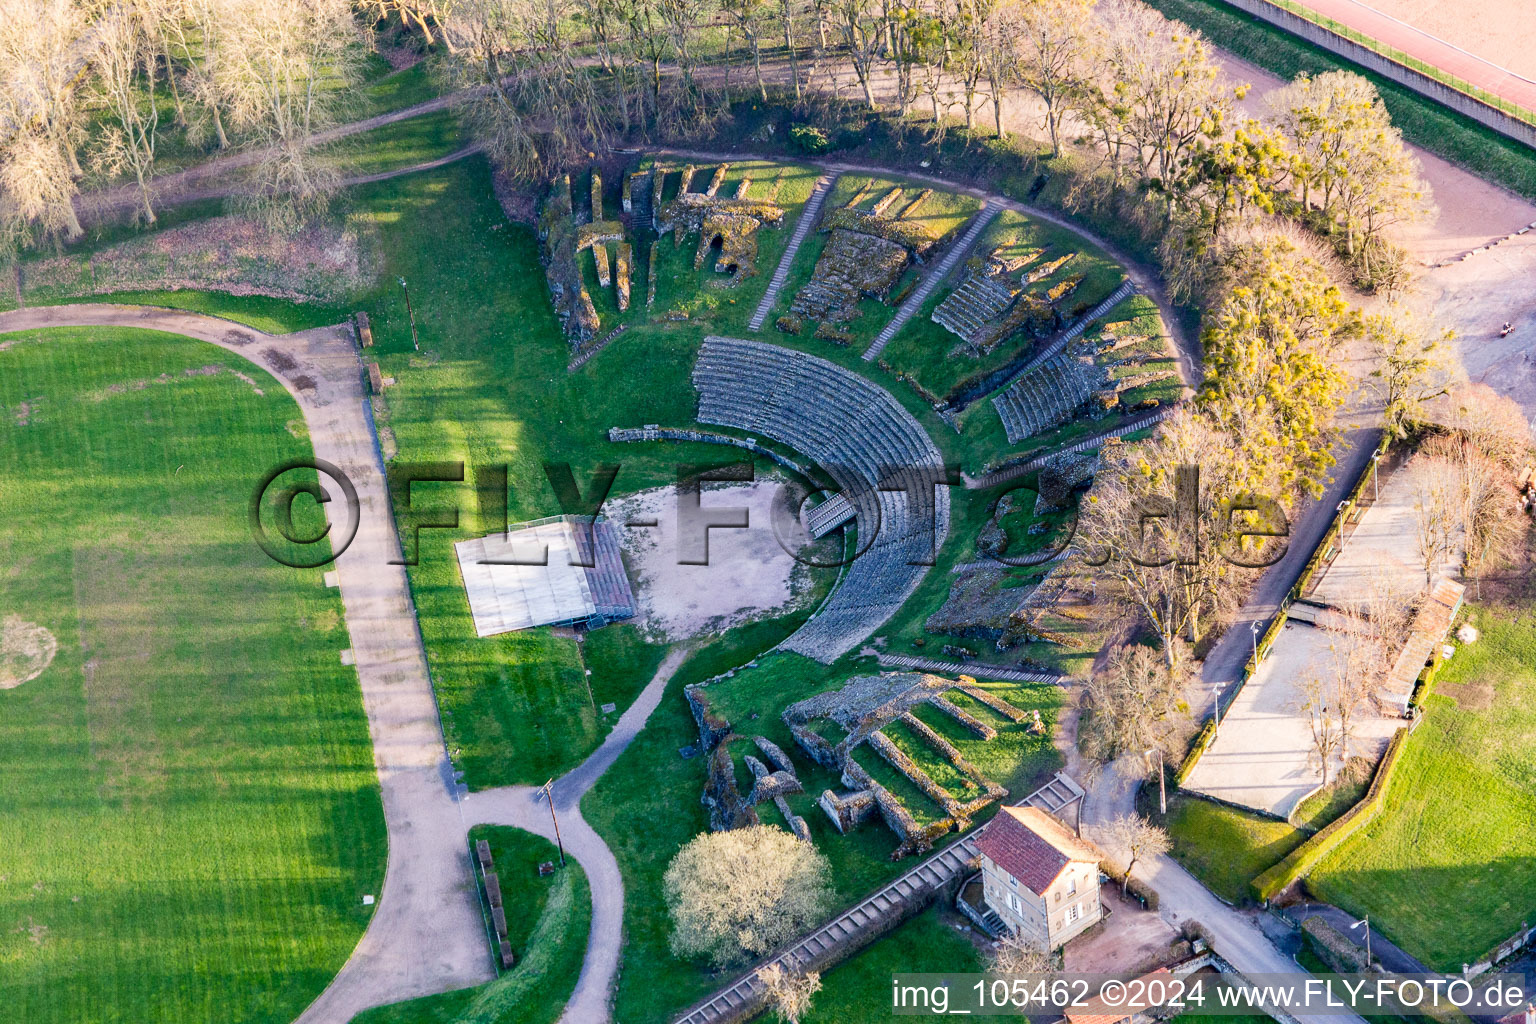 Historical attraction of the ensemble of the Roman amphitheater in Autun in Bourgogne-Franche-Comte, France